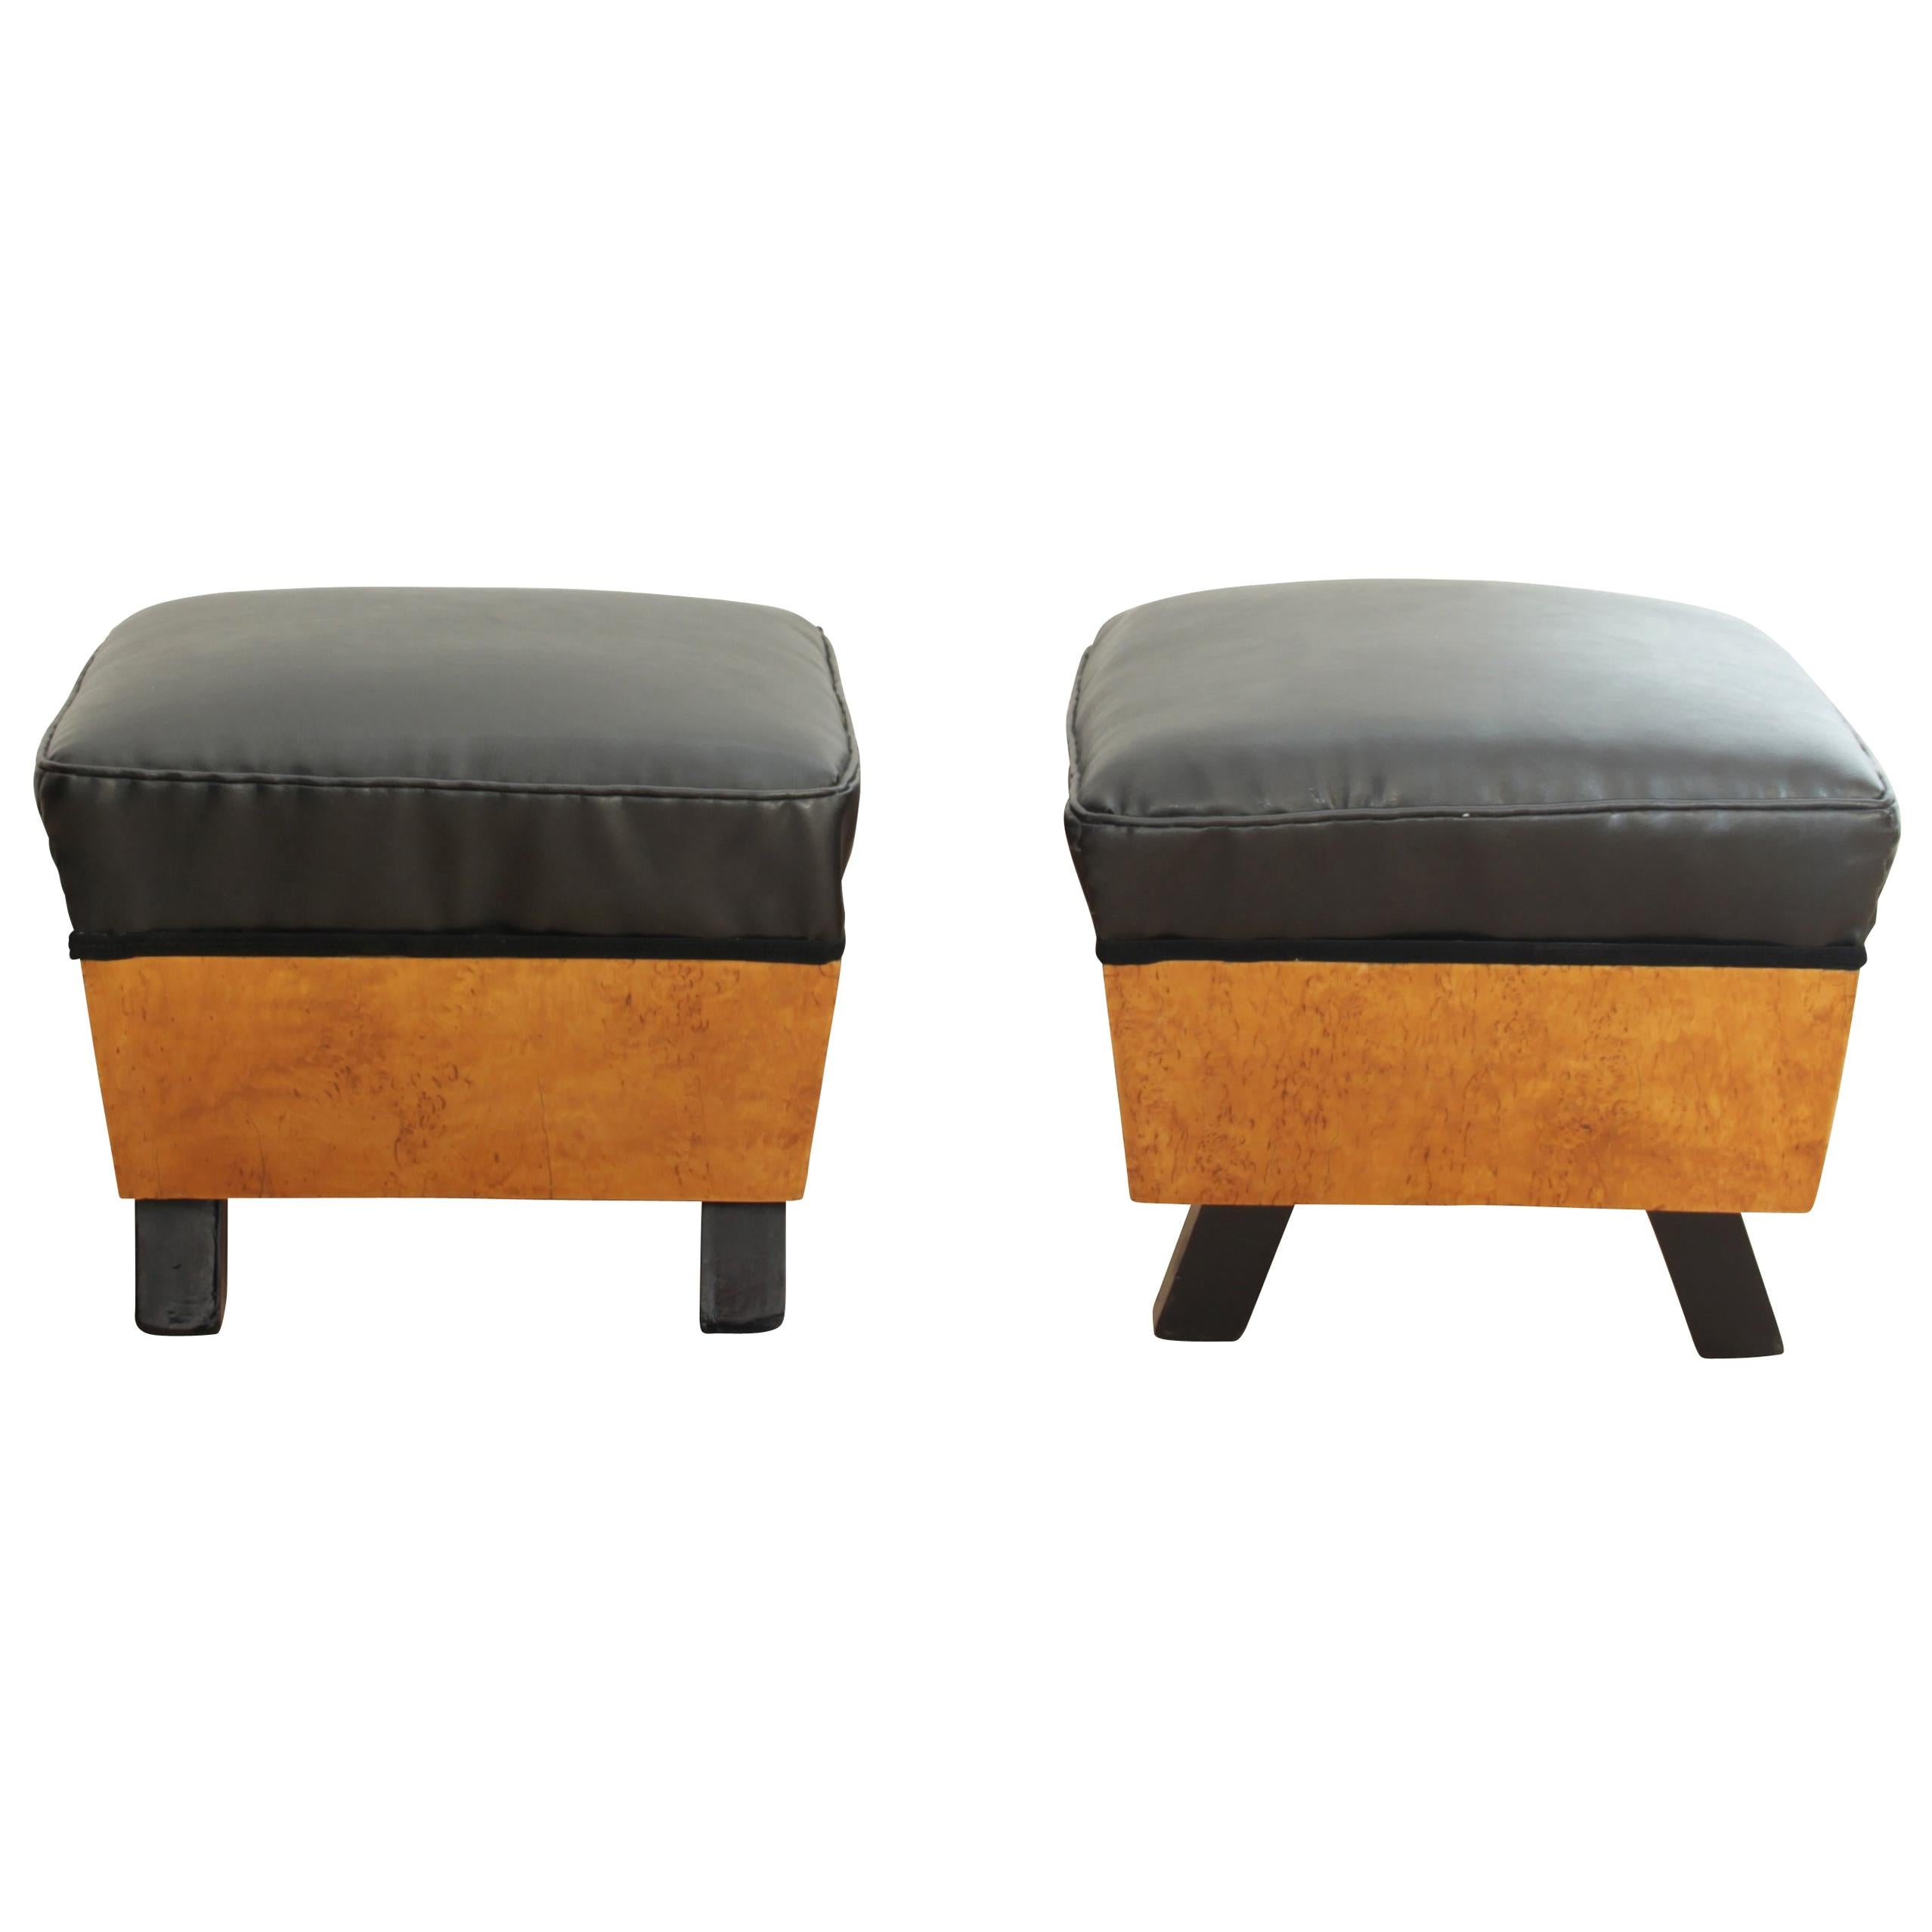 Art Deco Stool, Birch Roots, Faux Leather, France, circa 1930